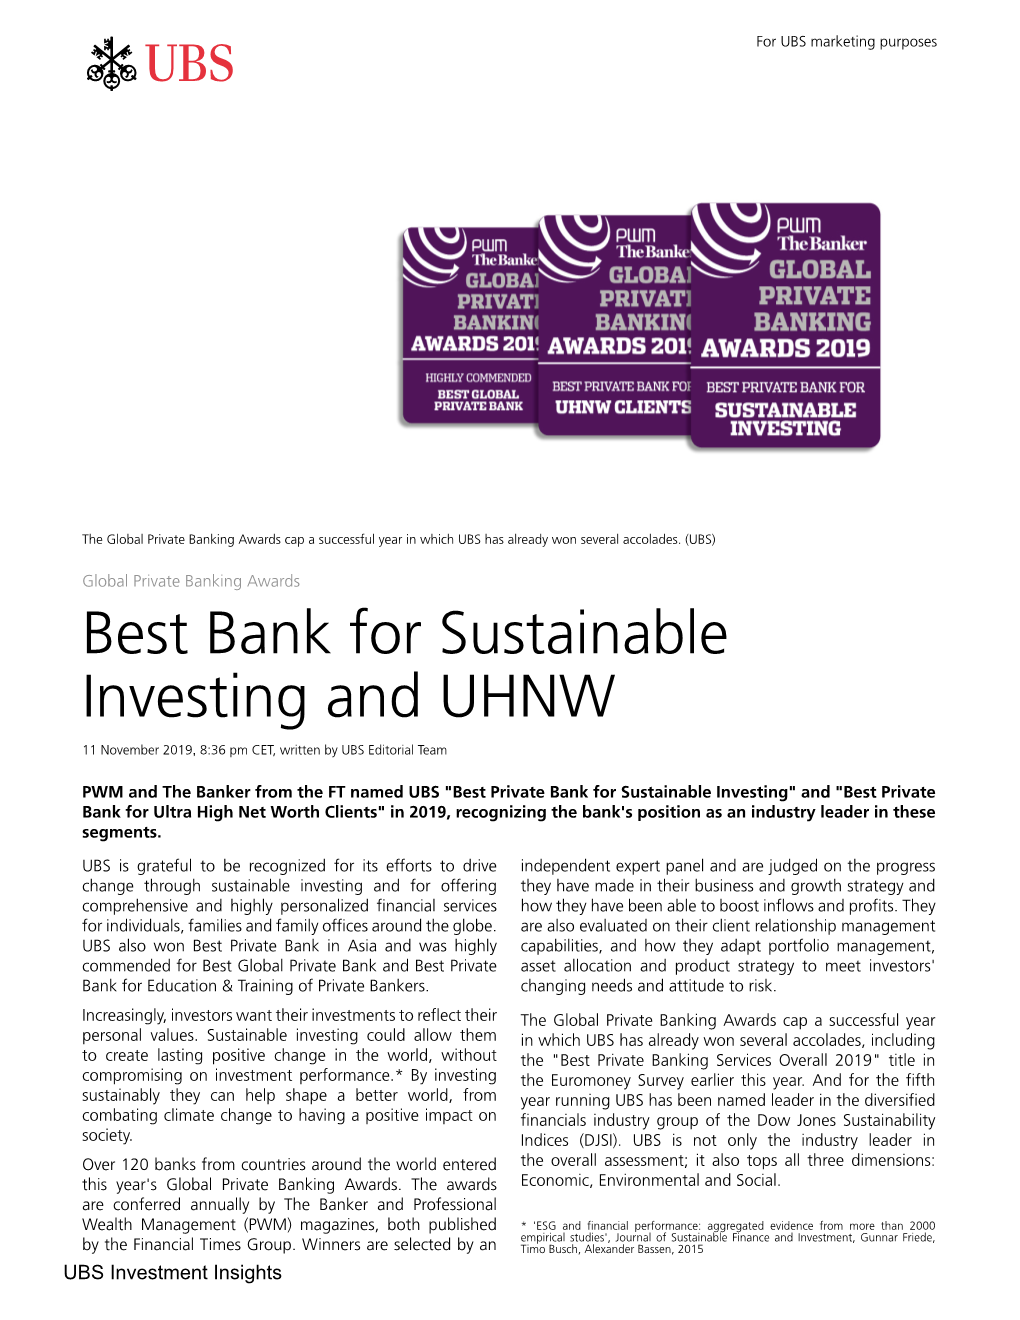 Best Bank for Sustainable Investing and UHNW